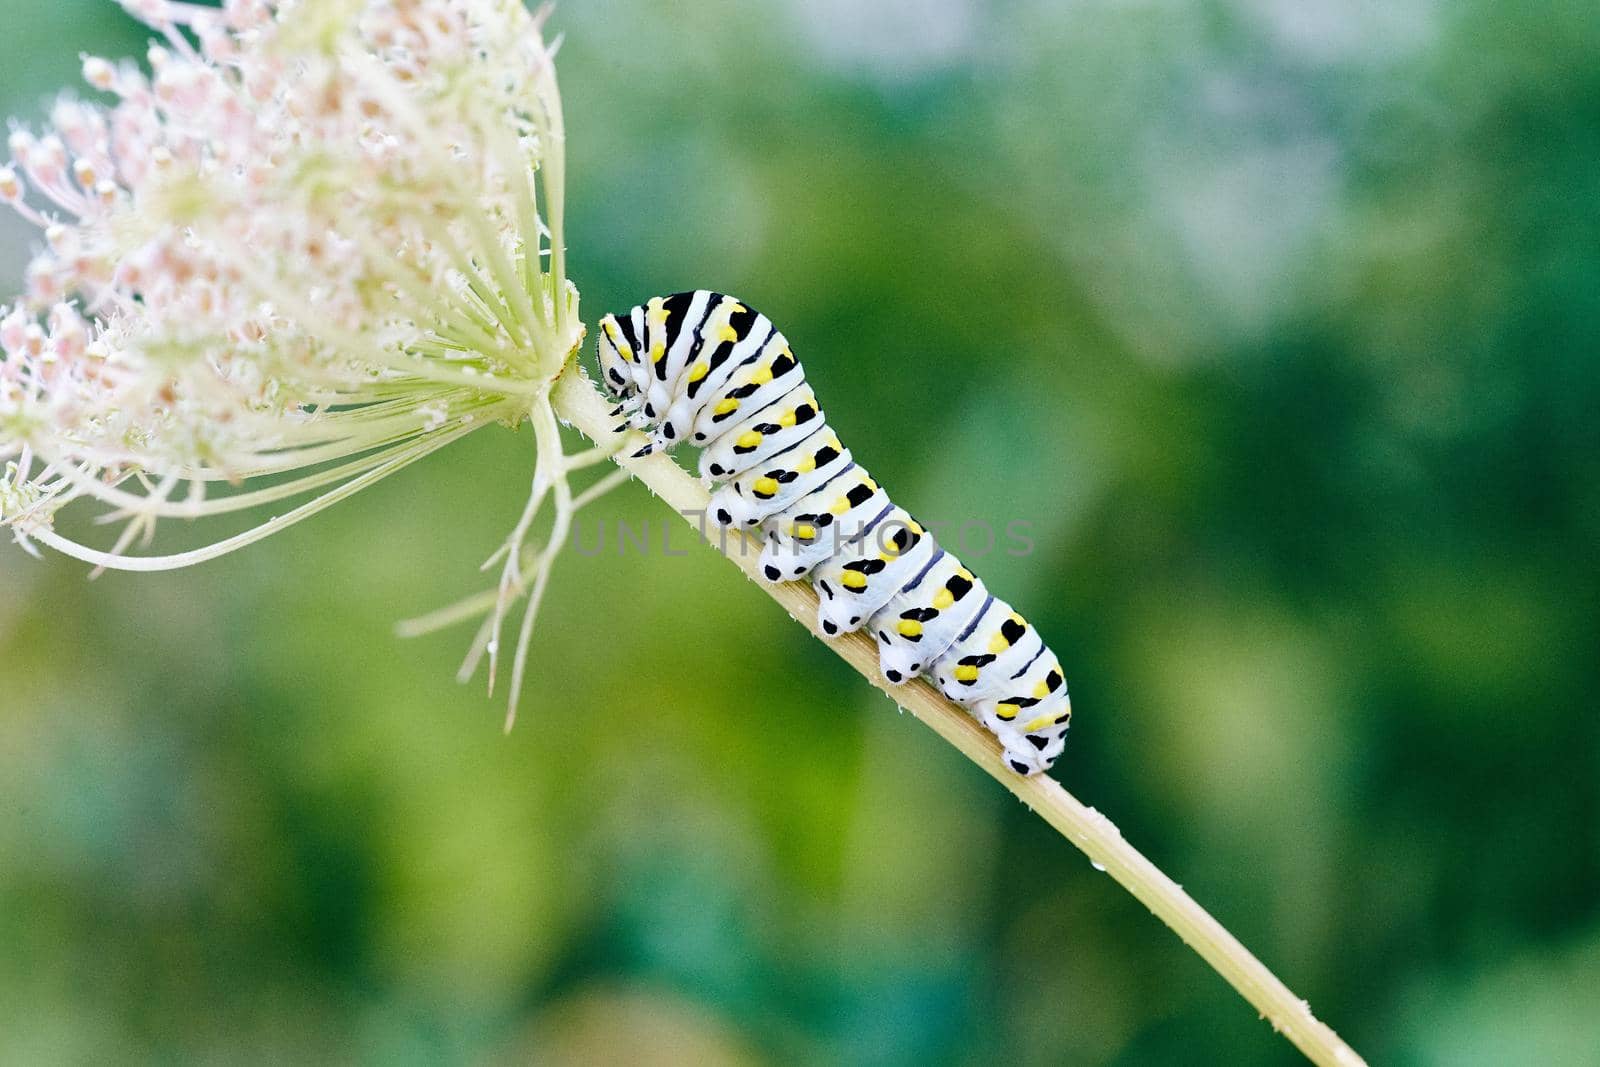 Image of White, yellow, and black stripped caterpillar climbing stem of white flower